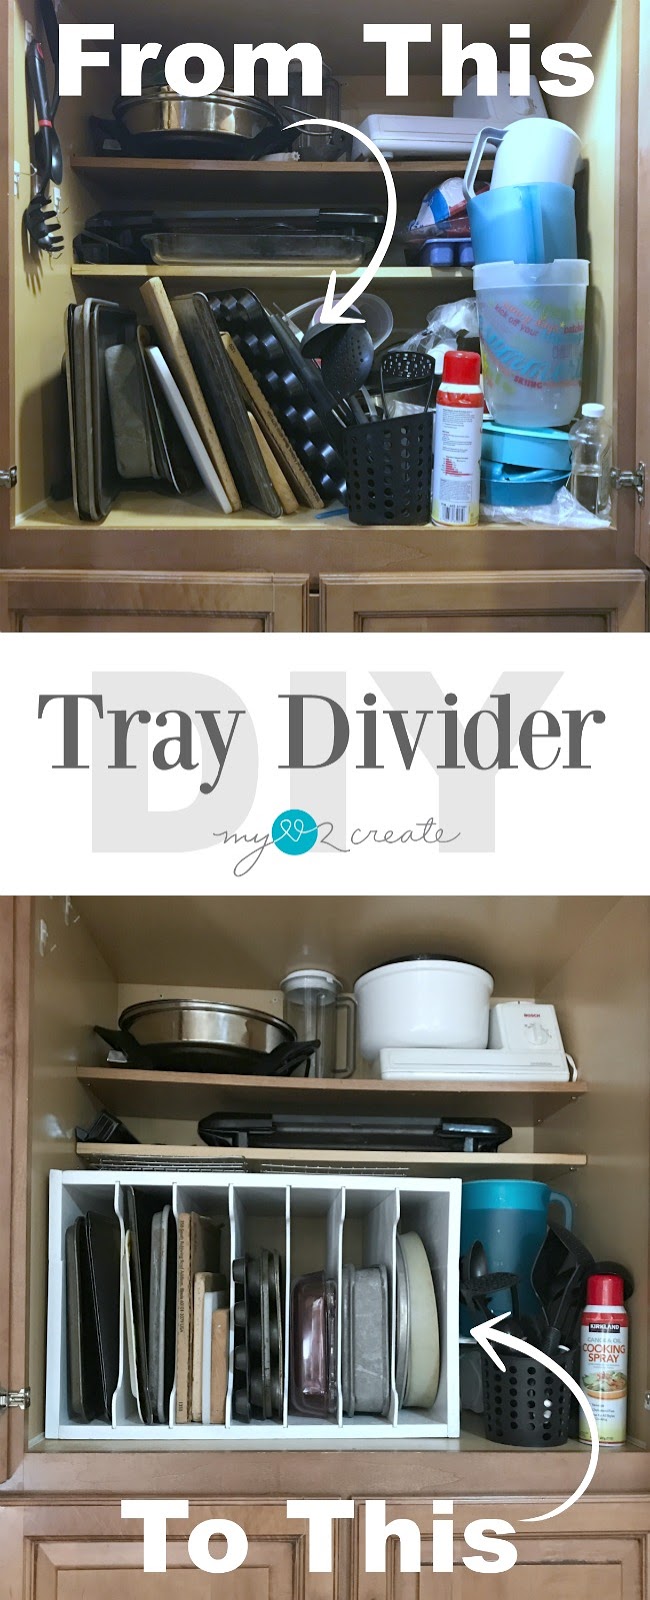 How to make a Tray divider using Dado Joints with free plans and a full picture tutorial, MyLove2Create